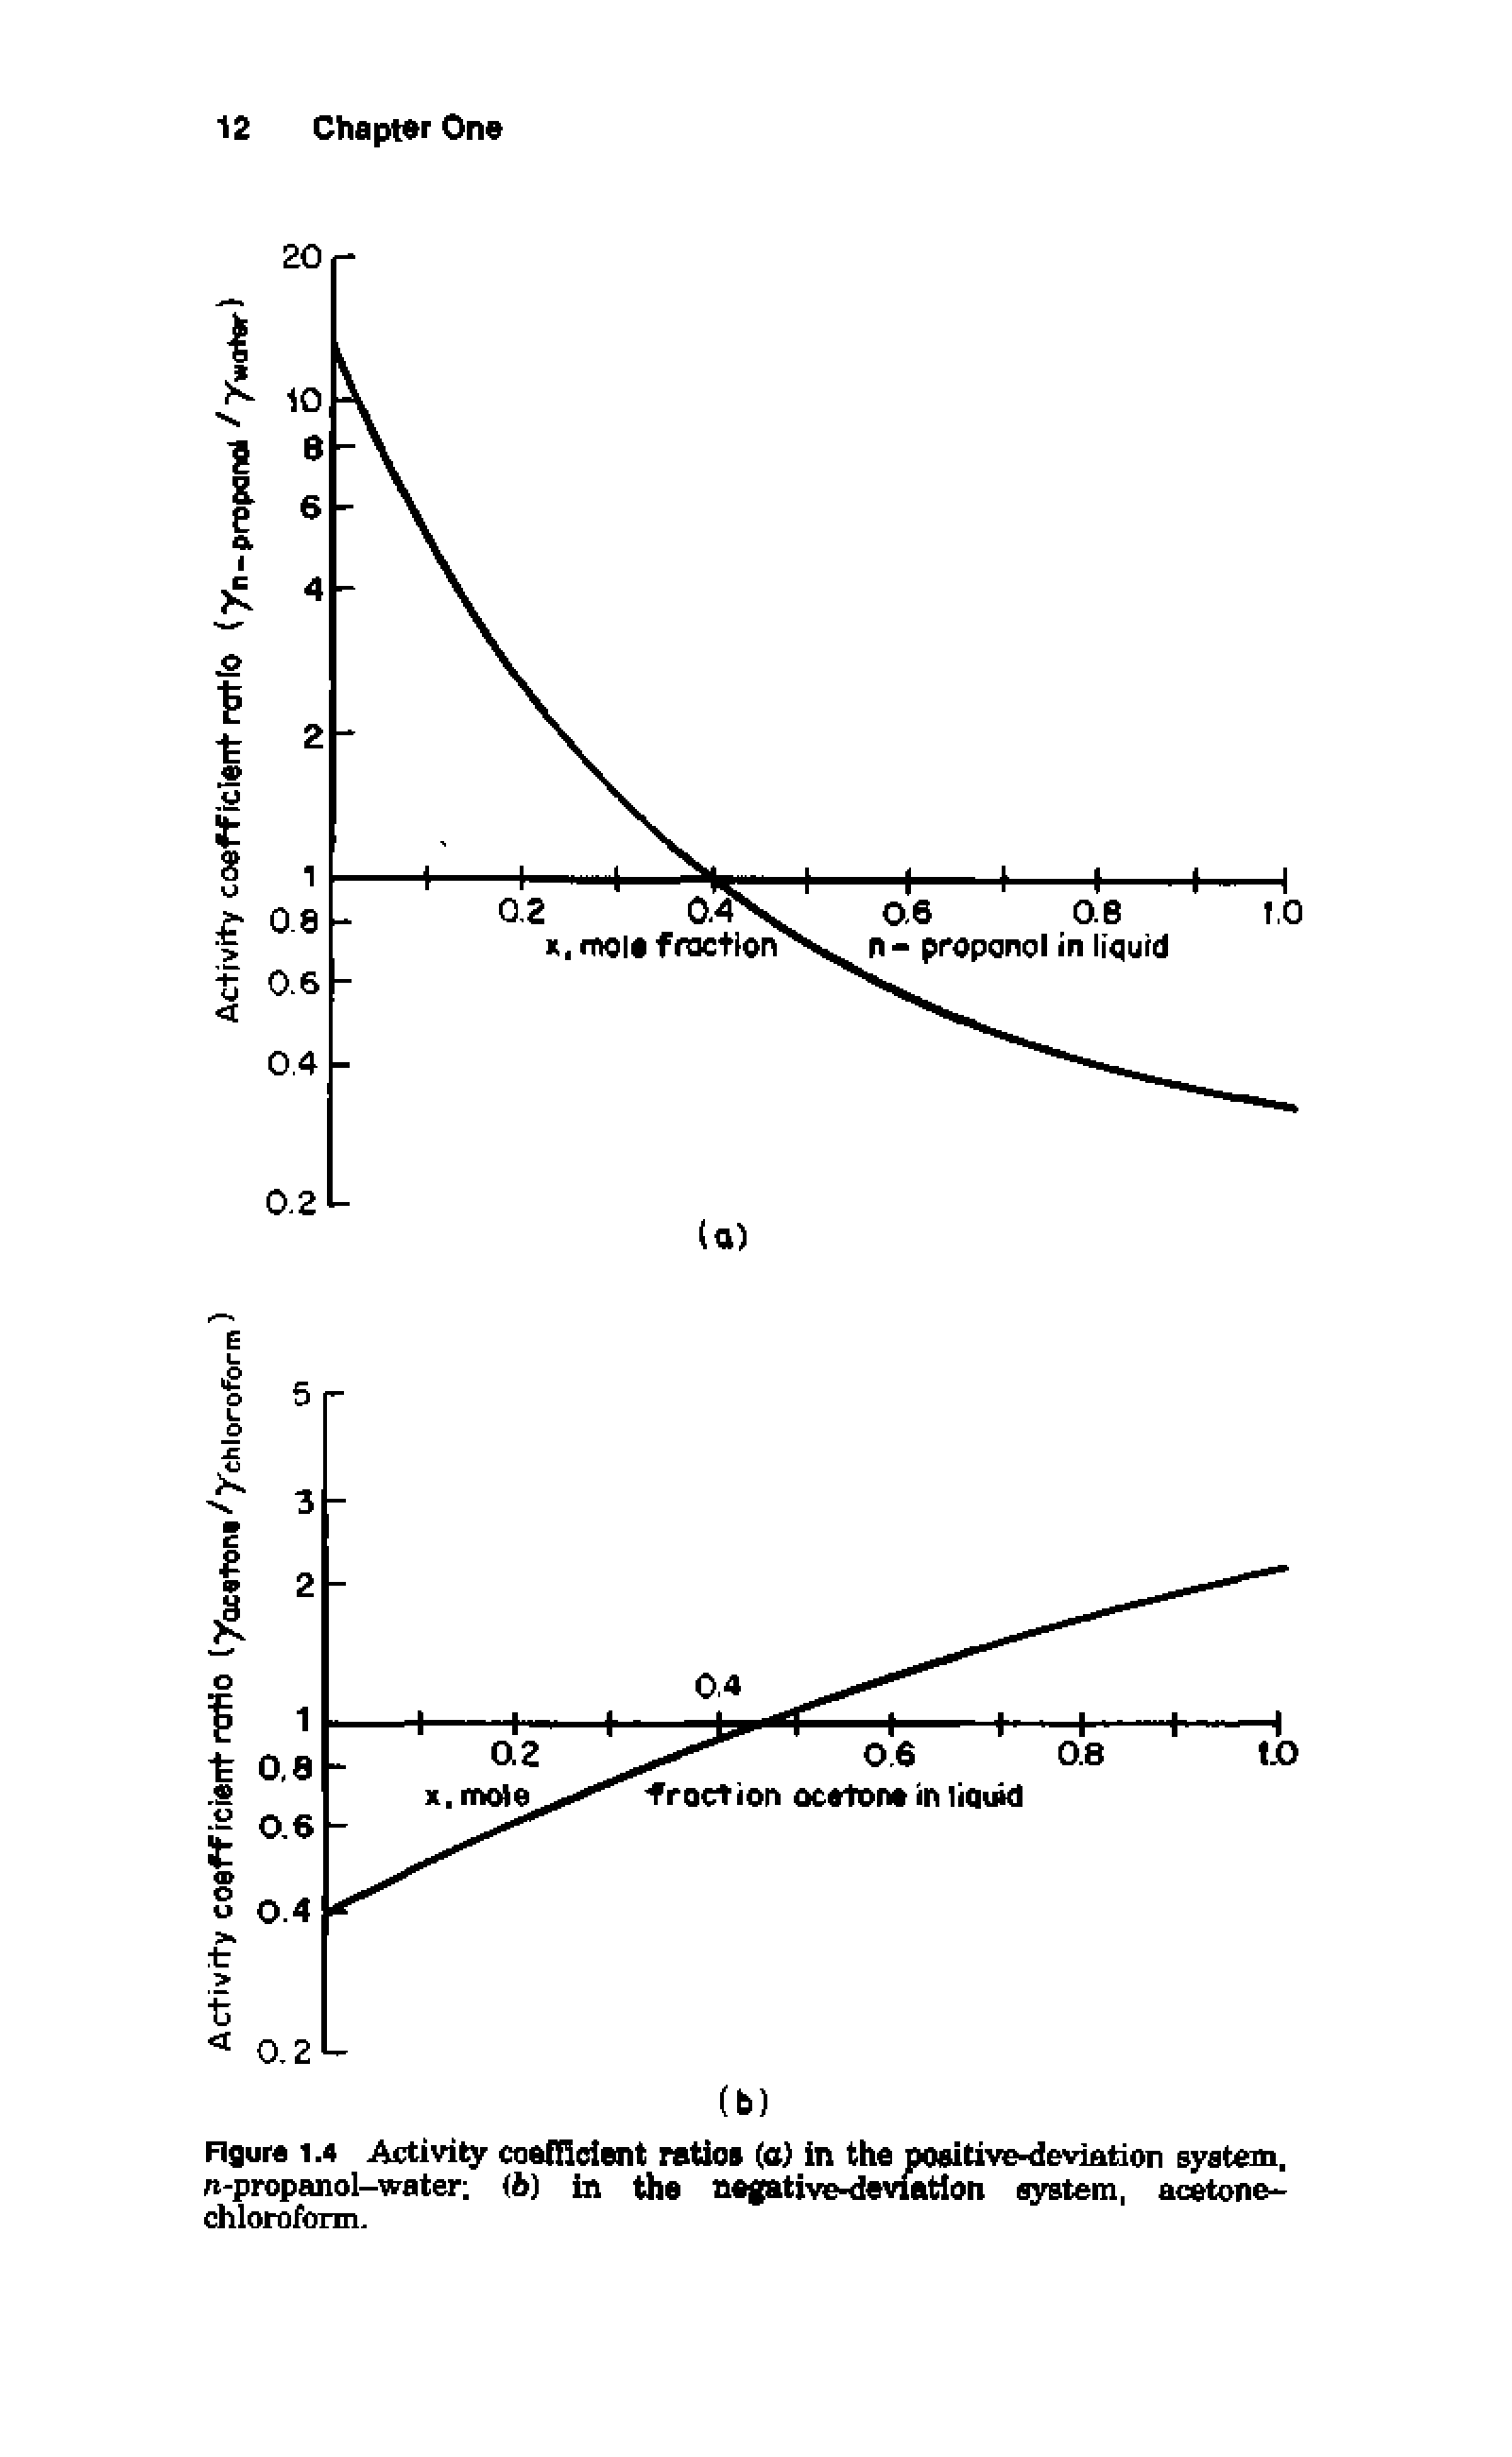 Figure 1.4 Activity coefficient ratios (a in the positive-deviation system, n-propanol-water (6) in the negative-deviation system, acetone-chloroform.